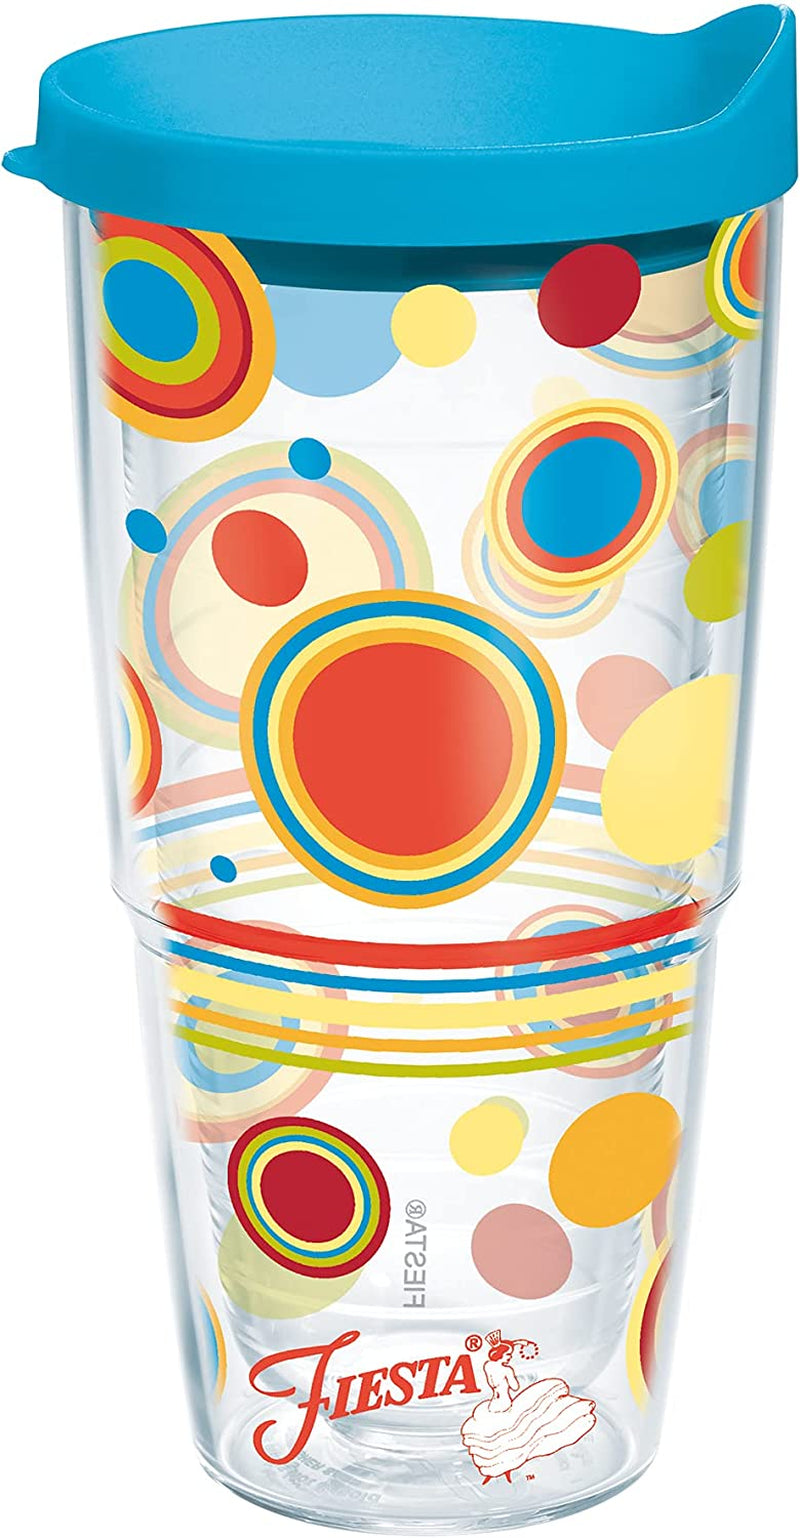 Tervis Made in USA Double Walled Fiesta Insulated Tumbler Cup Keeps Drinks Cold & Hot, 16Oz - 4Pk, Poppy Dots Home & Garden > Kitchen & Dining > Tableware > Drinkware Tervis Classic - Lidded 24oz 